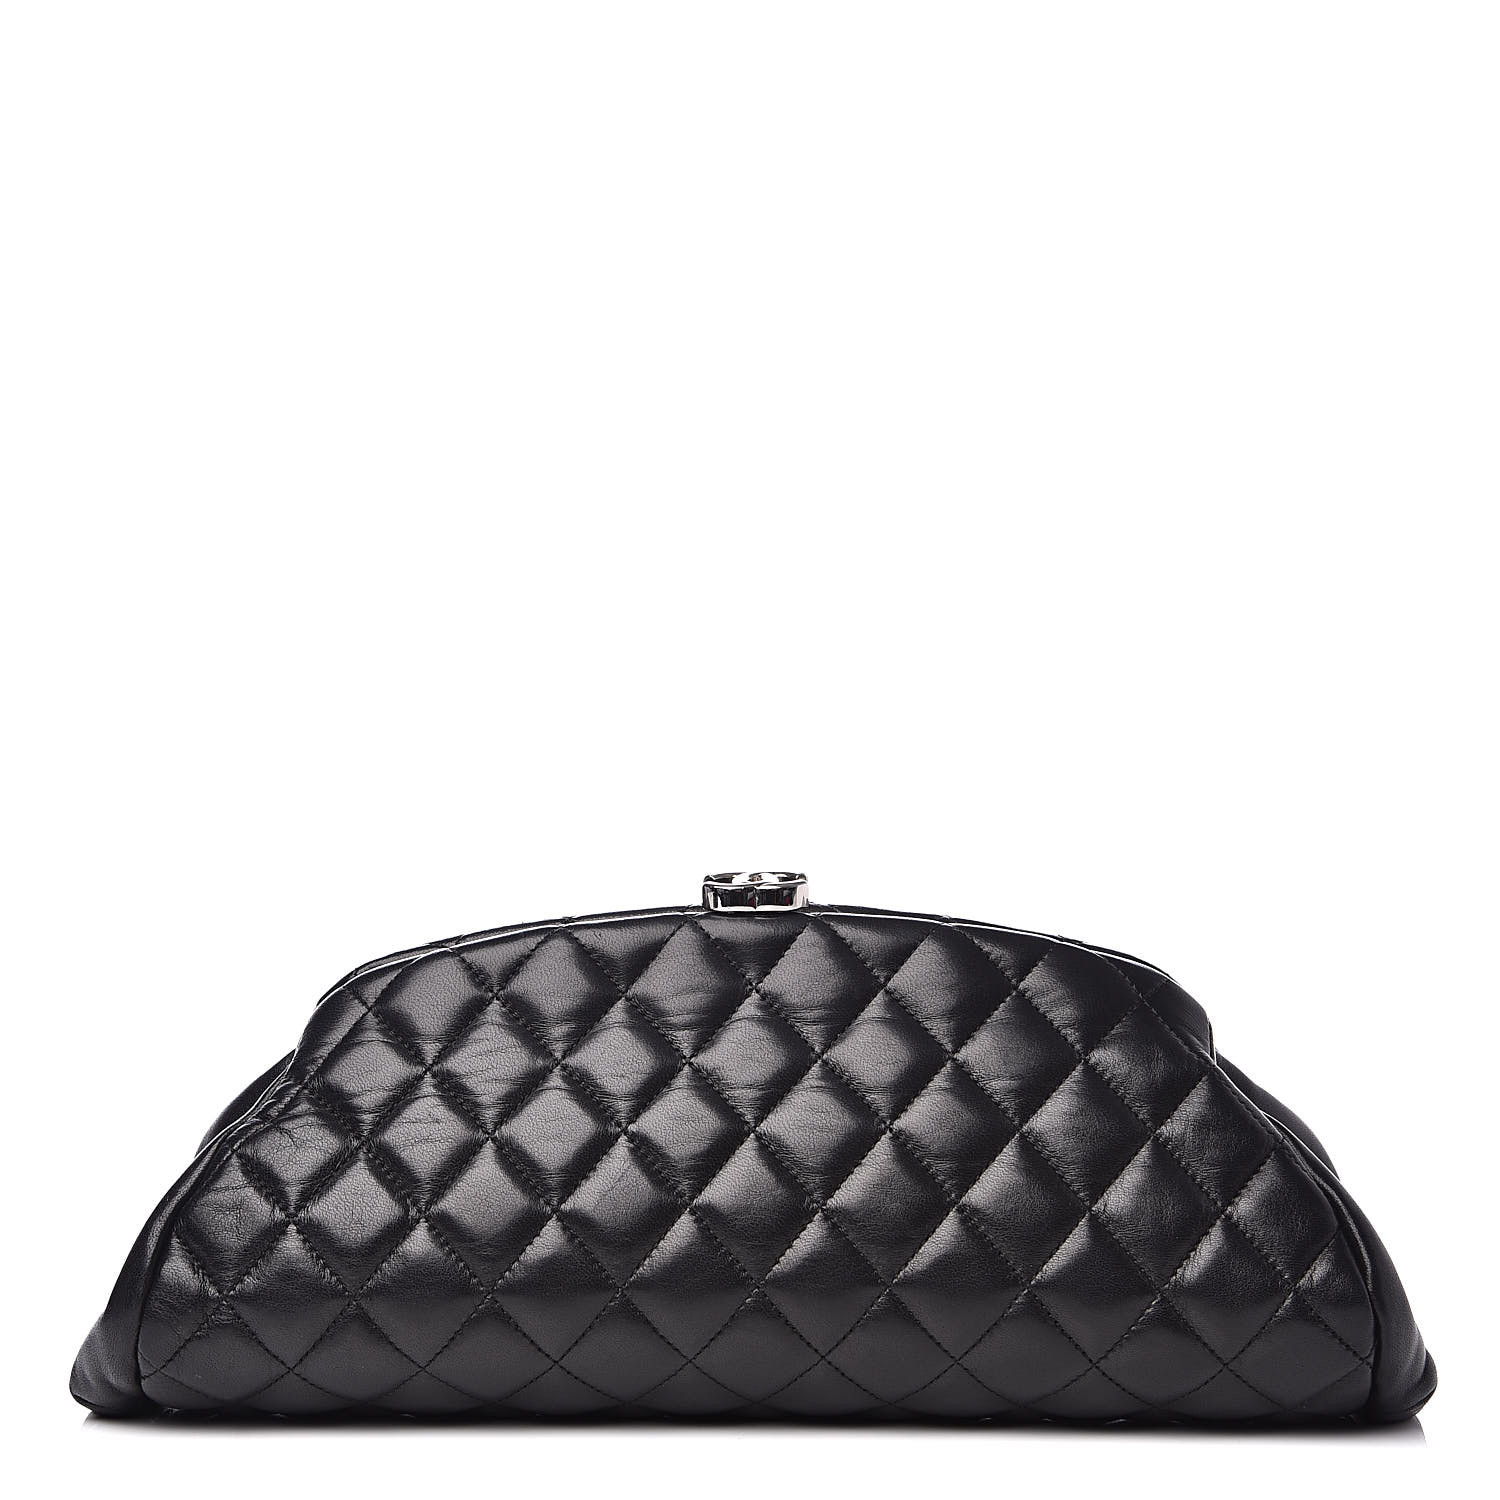 CHANEL Lambskin Quilted Timeless Clutch Black 524433